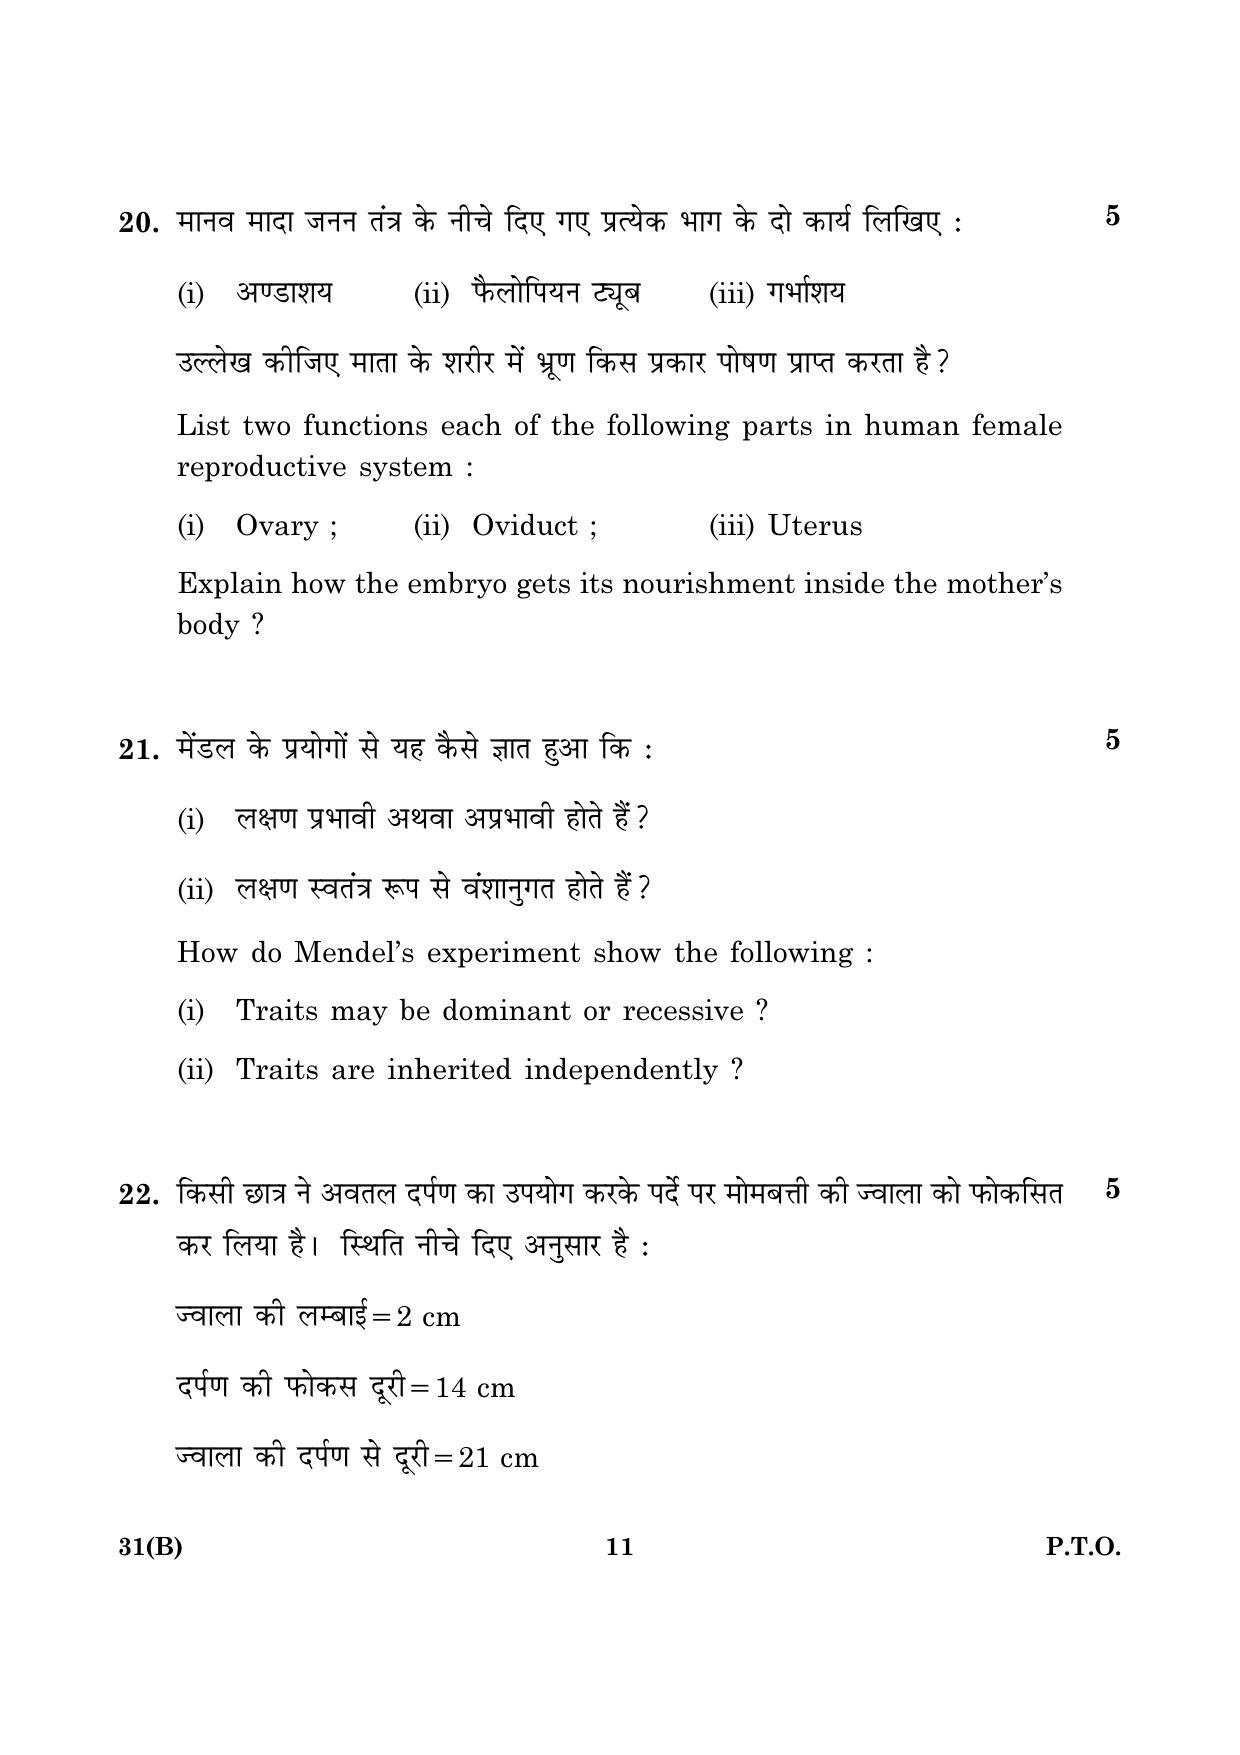 CBSE Class 10 031(B) Science 2016 Question Paper - Page 11